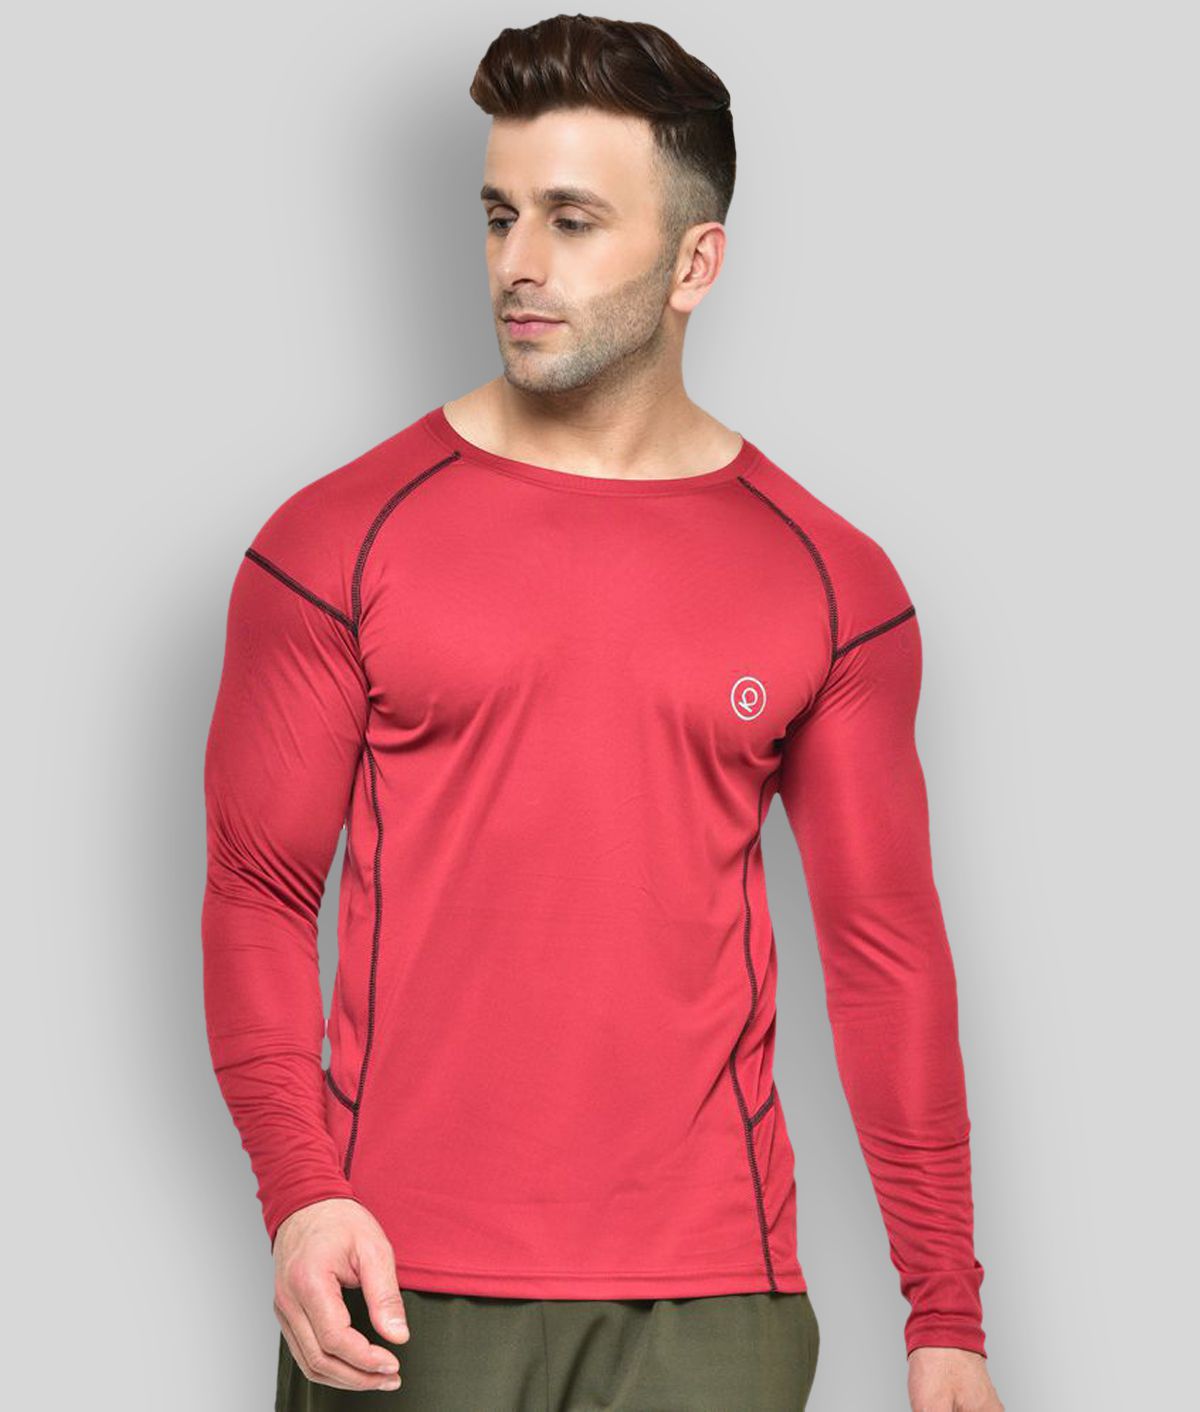     			Chkokko - Polyester Regular Fit Rough Red Men's Sports T-Shirt ( Pack of 1 )